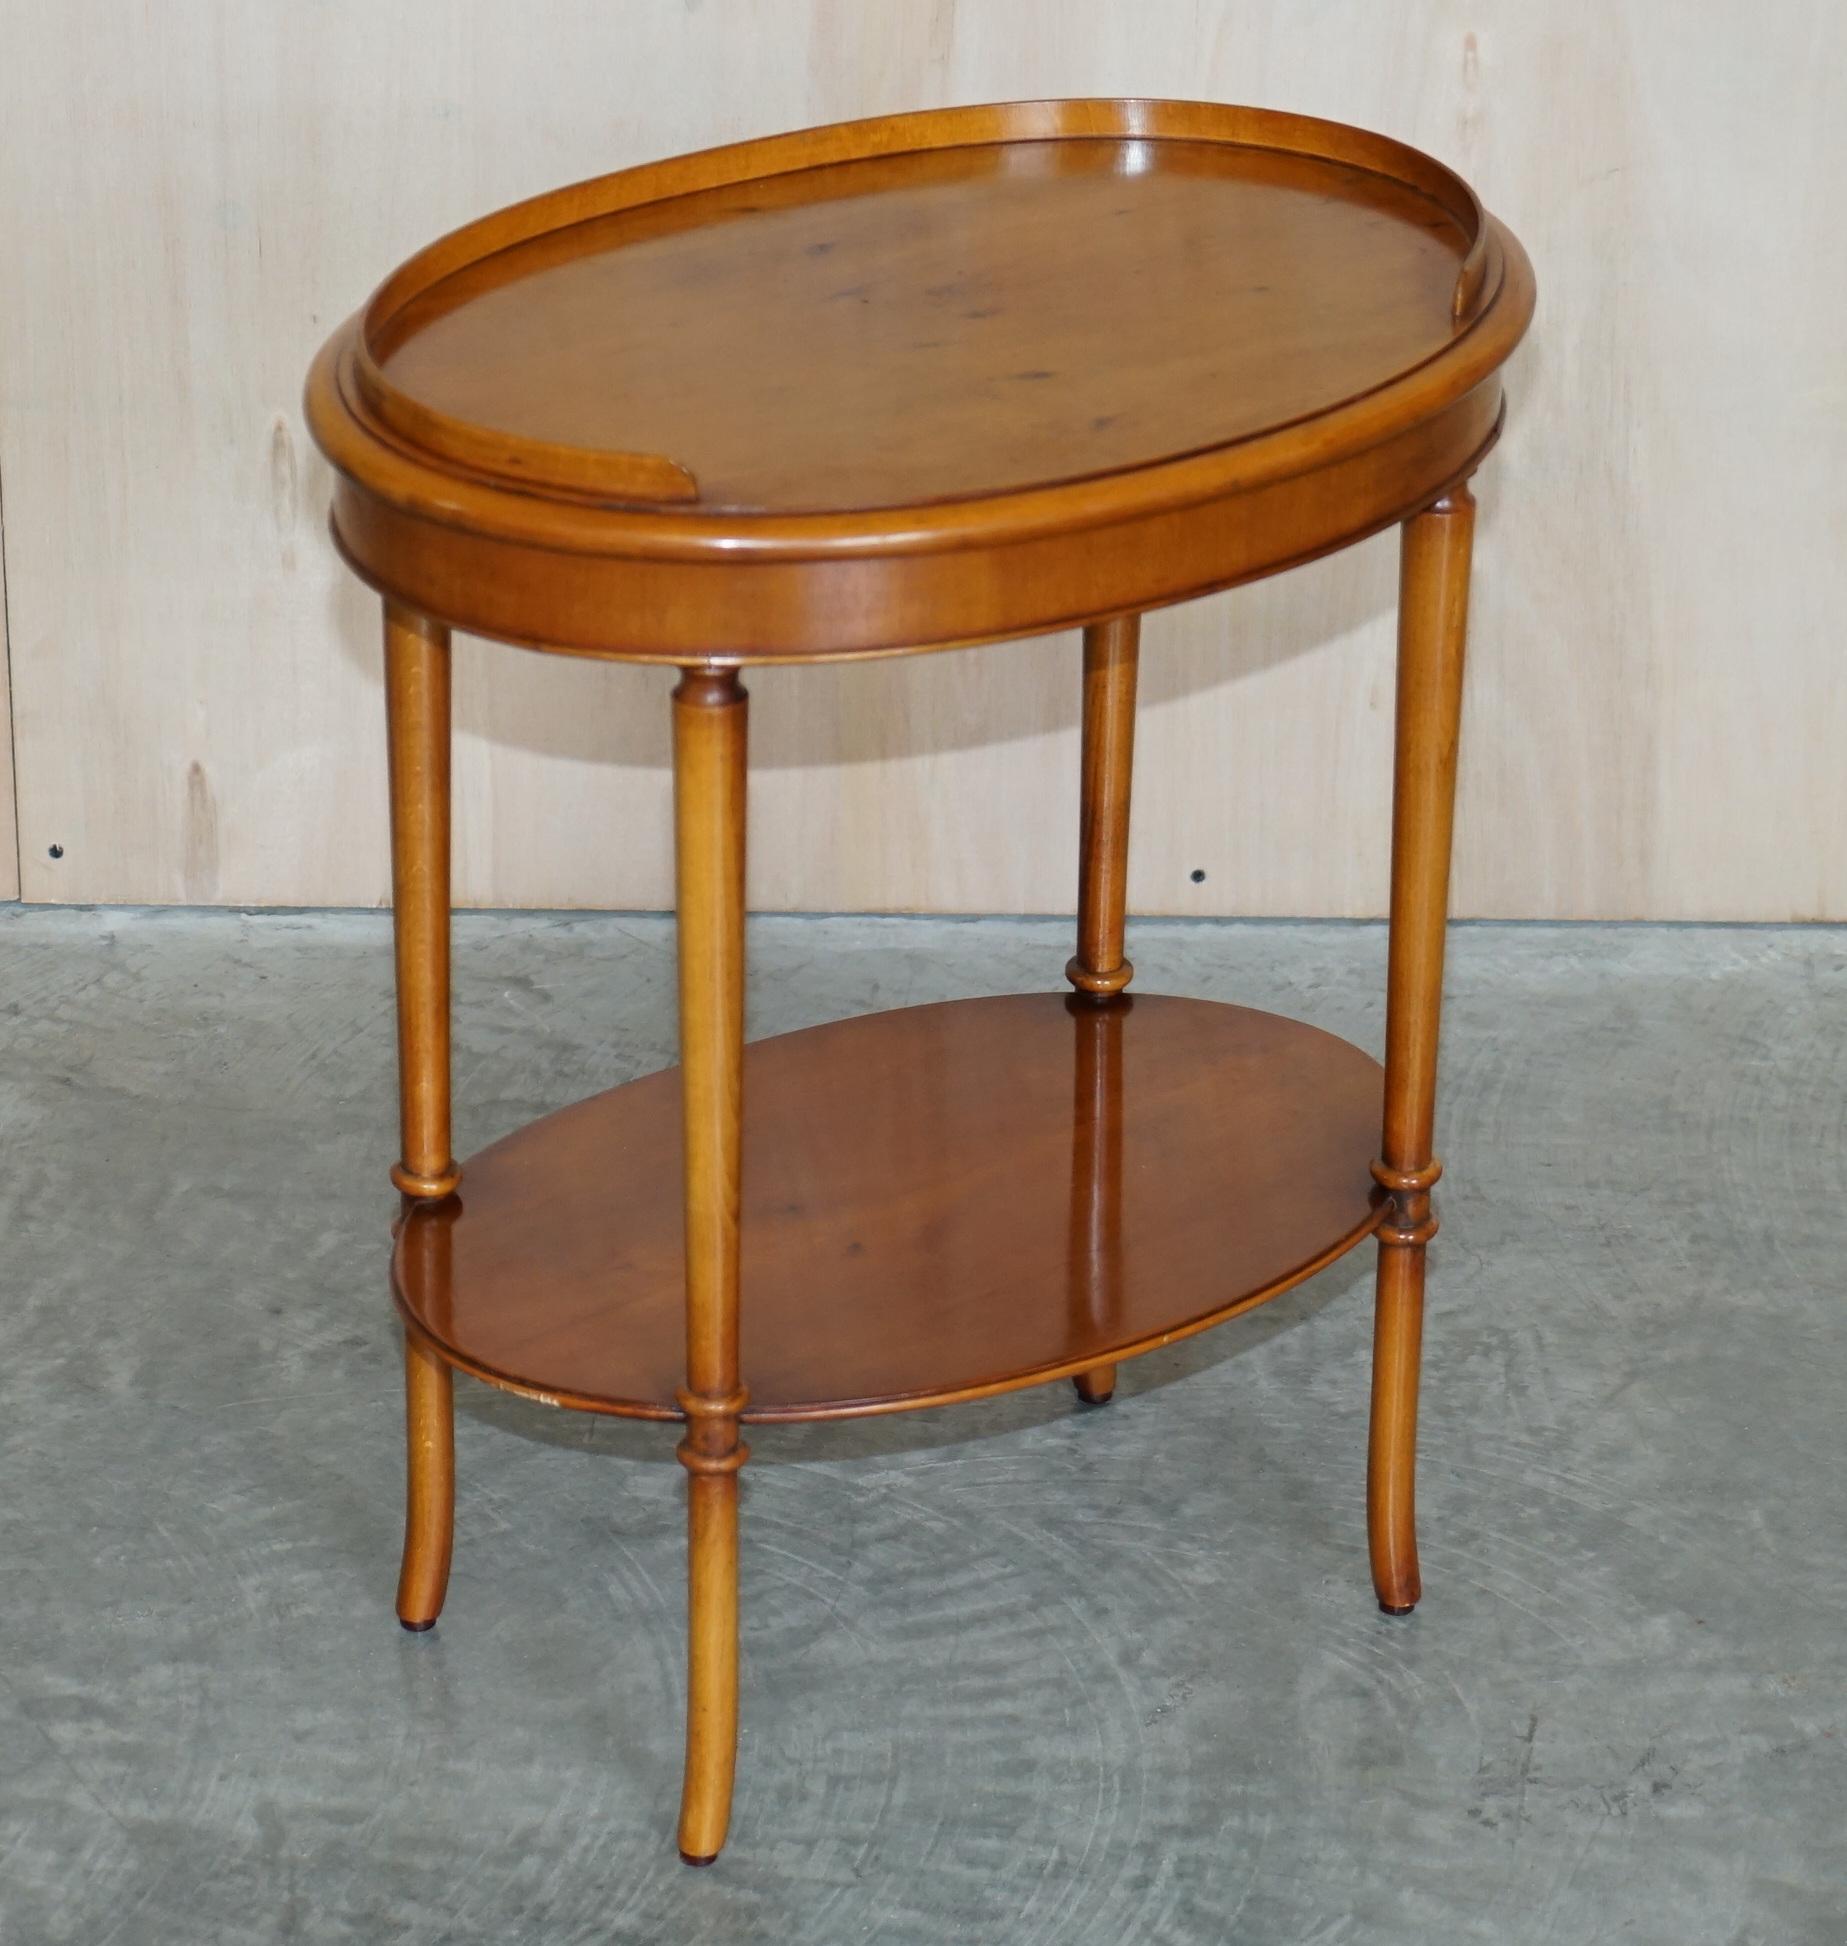 We are is delighted to offer for sale this lovely vintage Burr Yew Wood oval side end lamp wine table with gallery rail top

A good looking well made and decorative table, it has a nice vintage patina to it and works well in any setting

We have